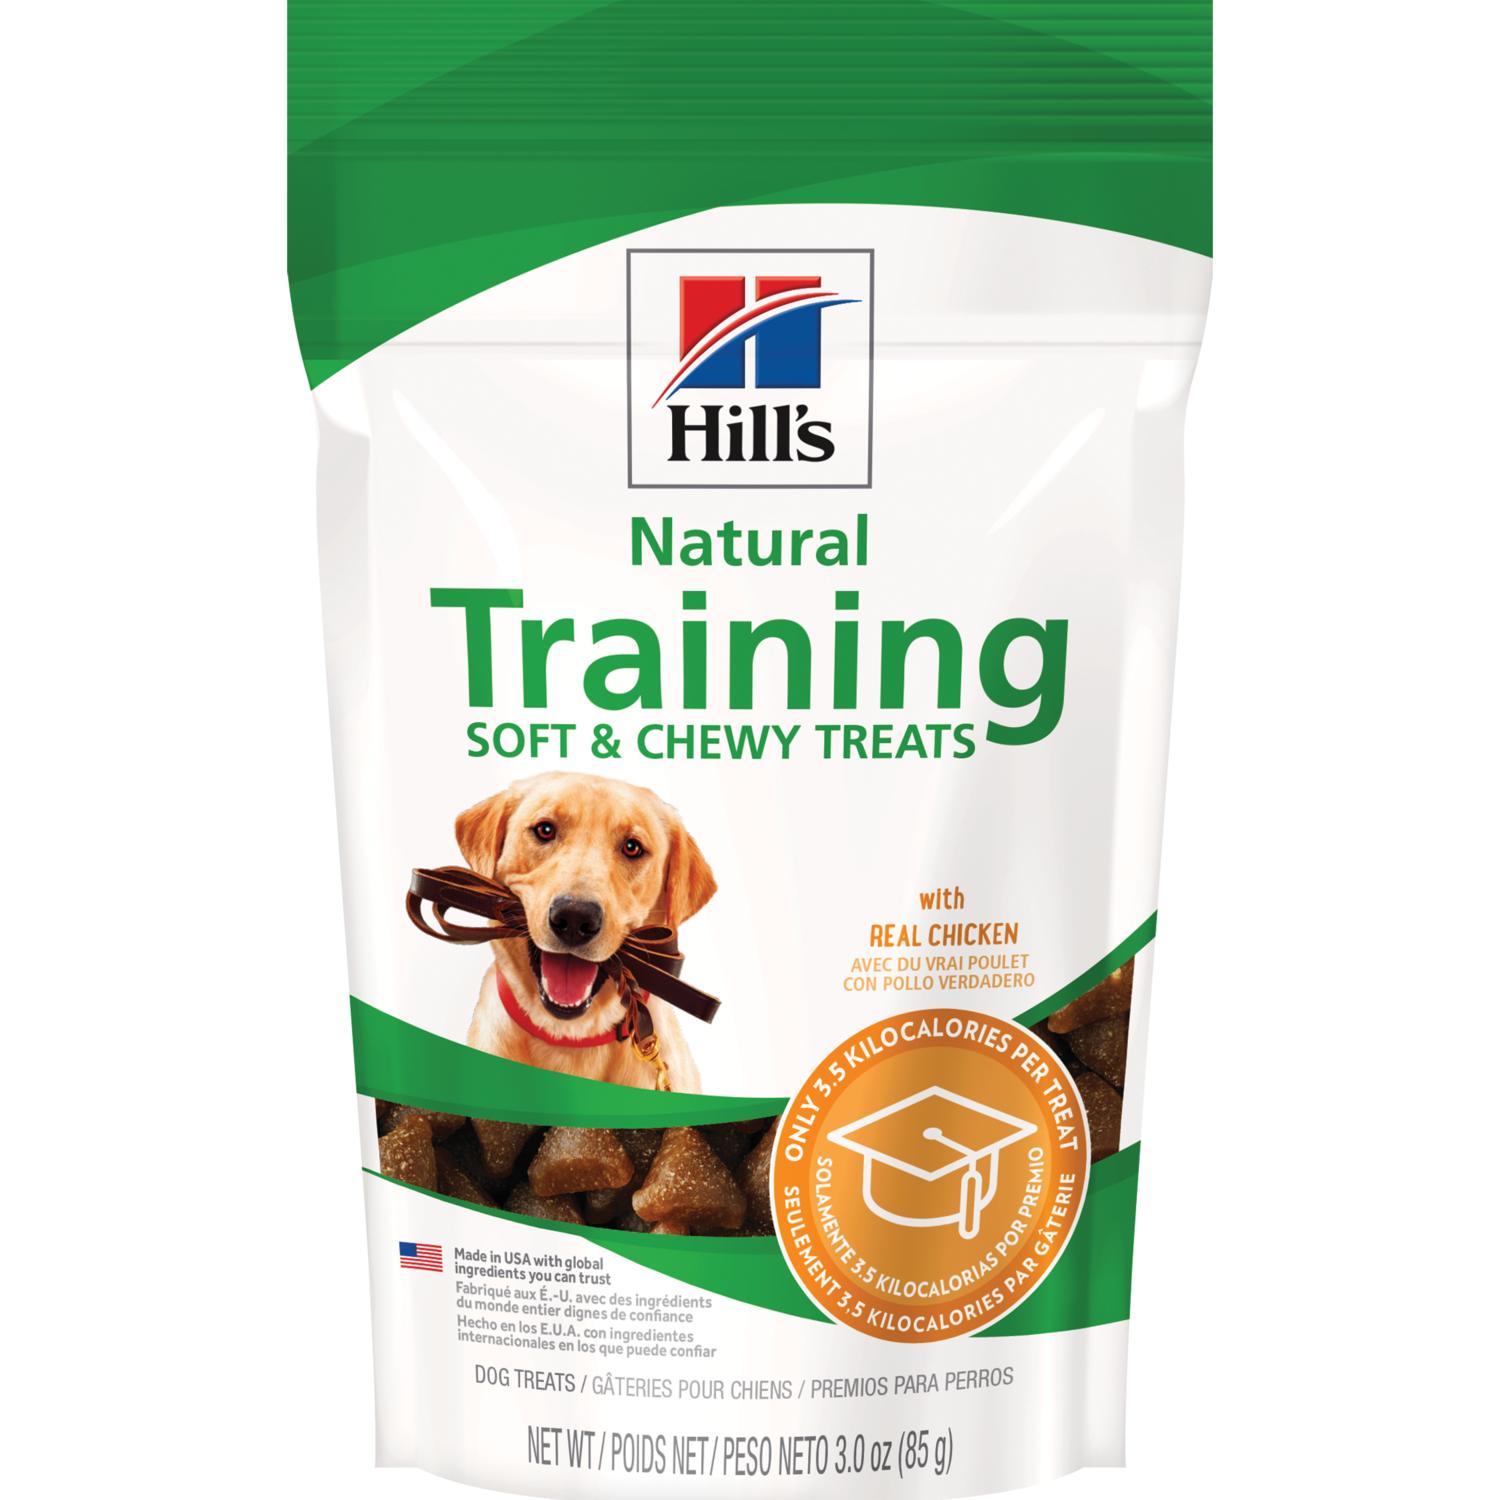 natural-training-soft-chewy-chicken-treats-productShot_zoom